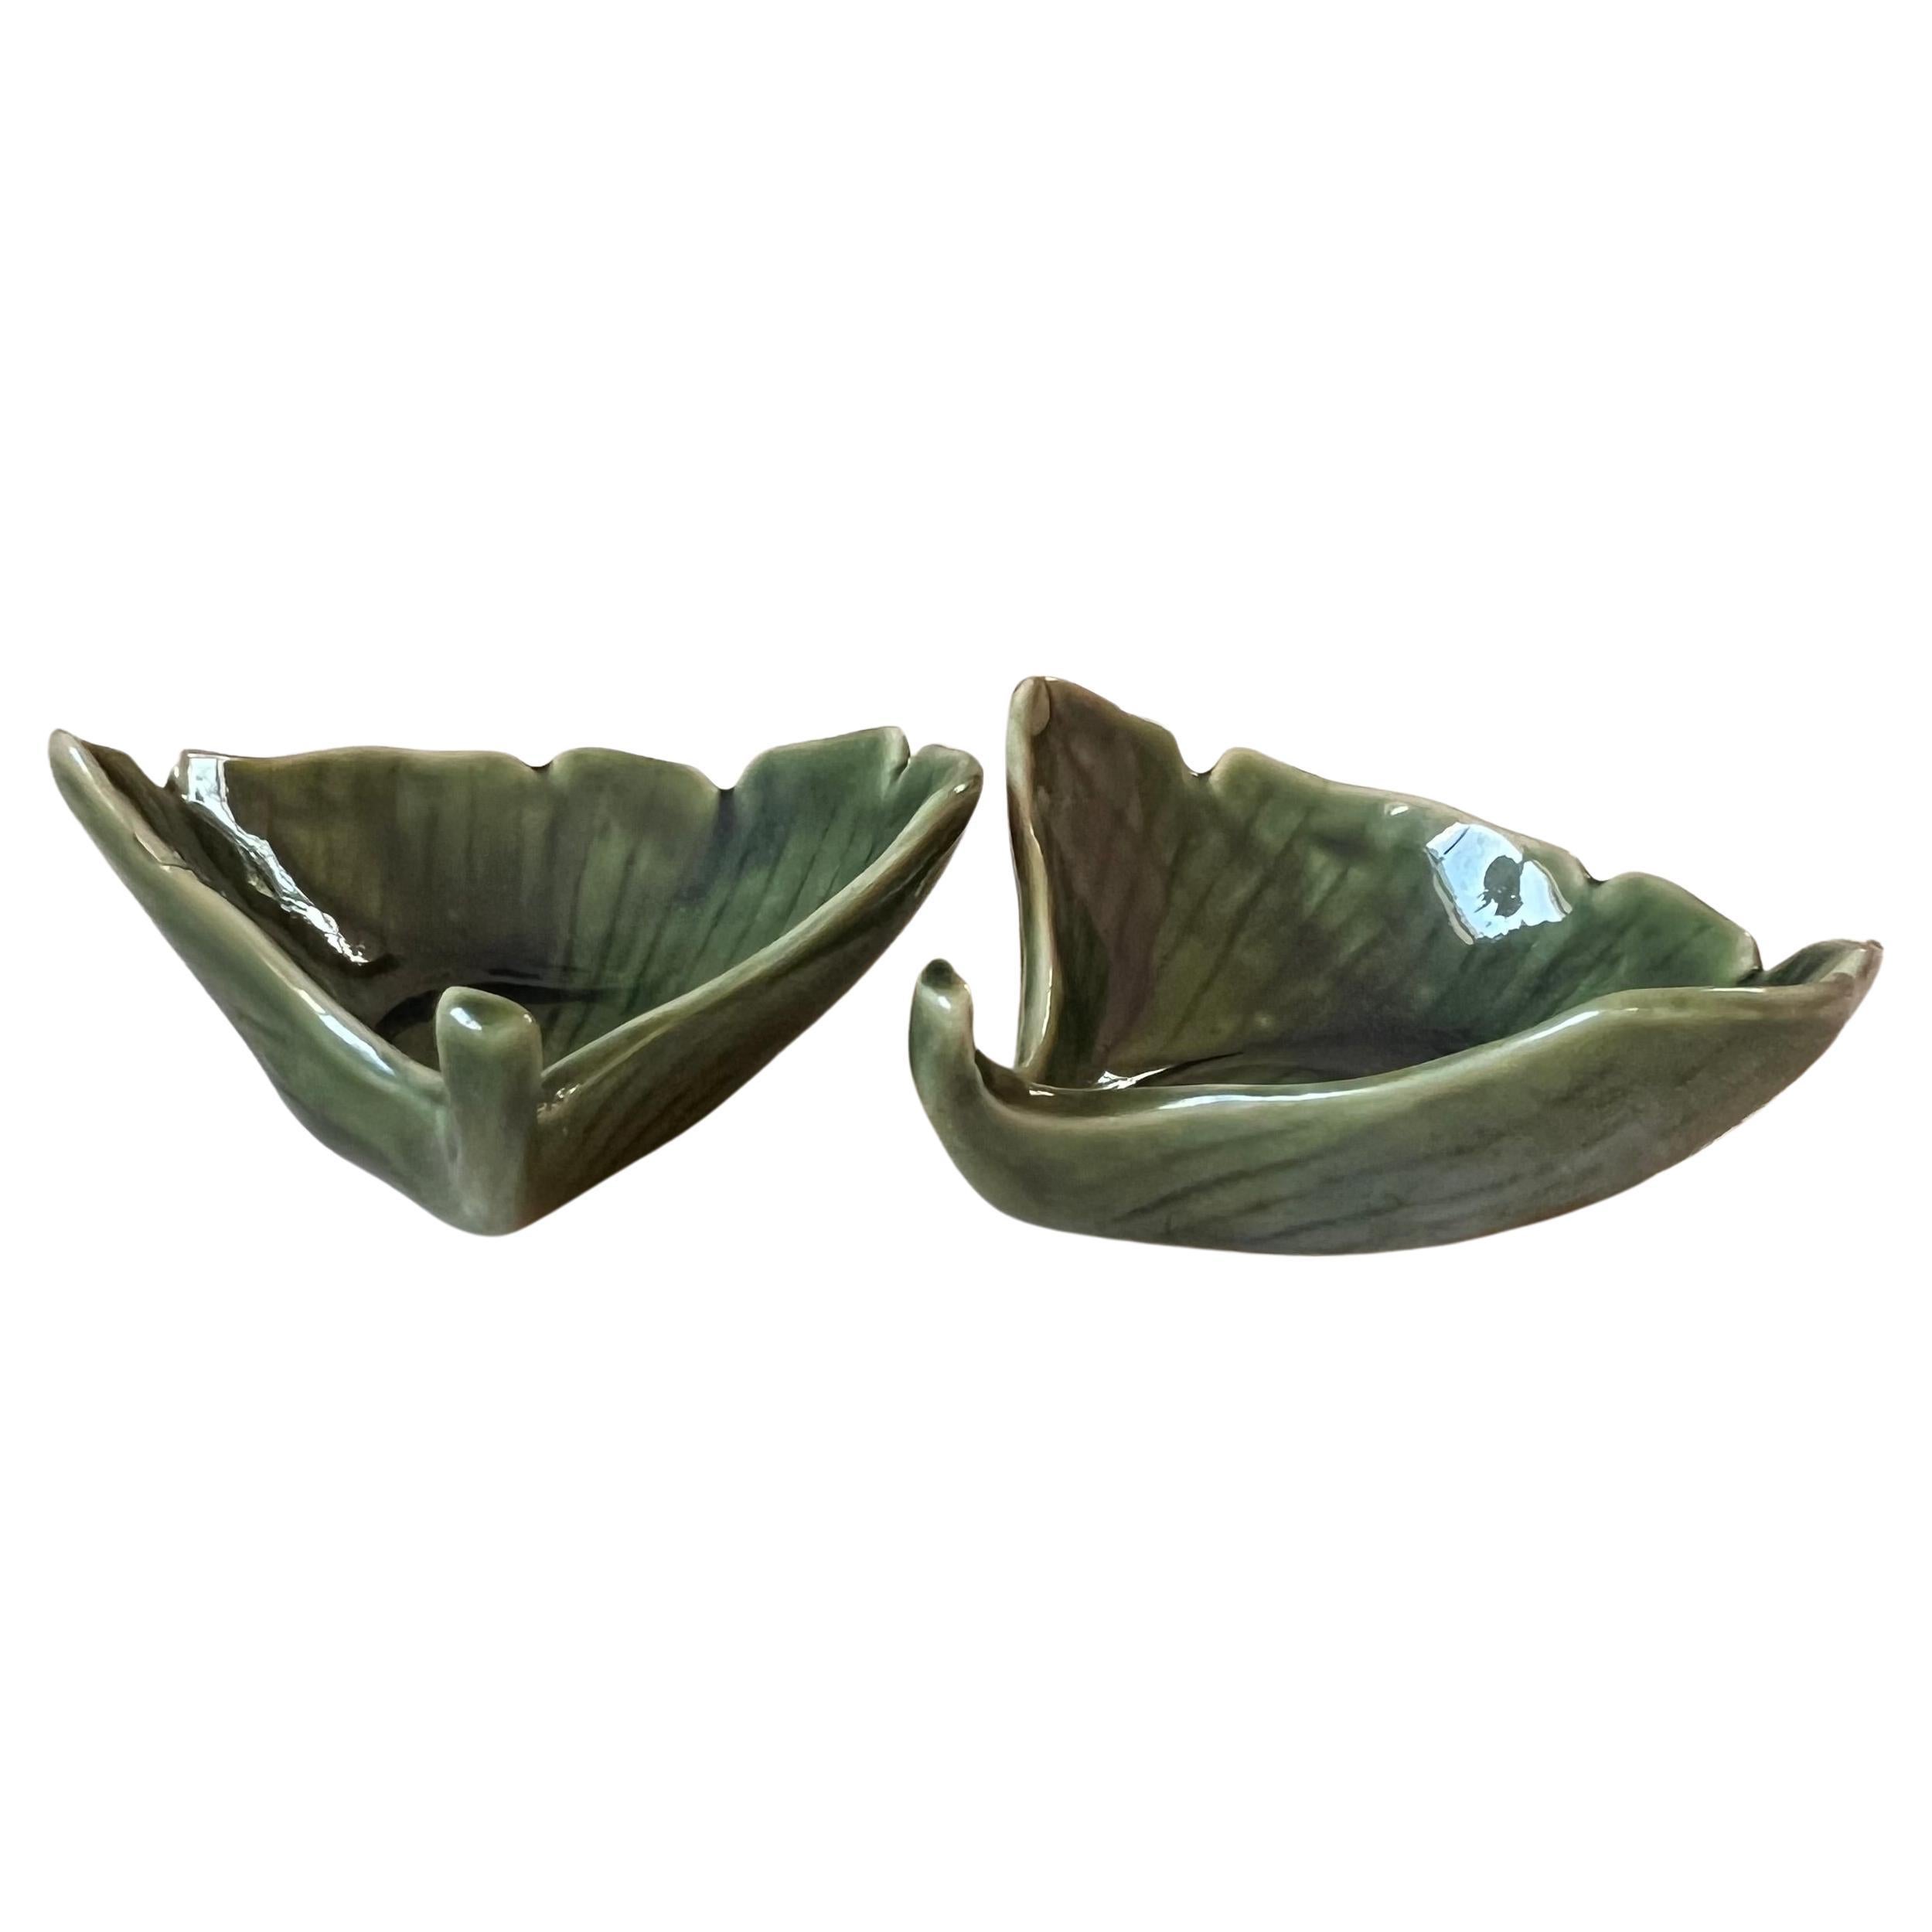 Pair of Vintage Japanese Leaf Dishes, 20th Century For Sale